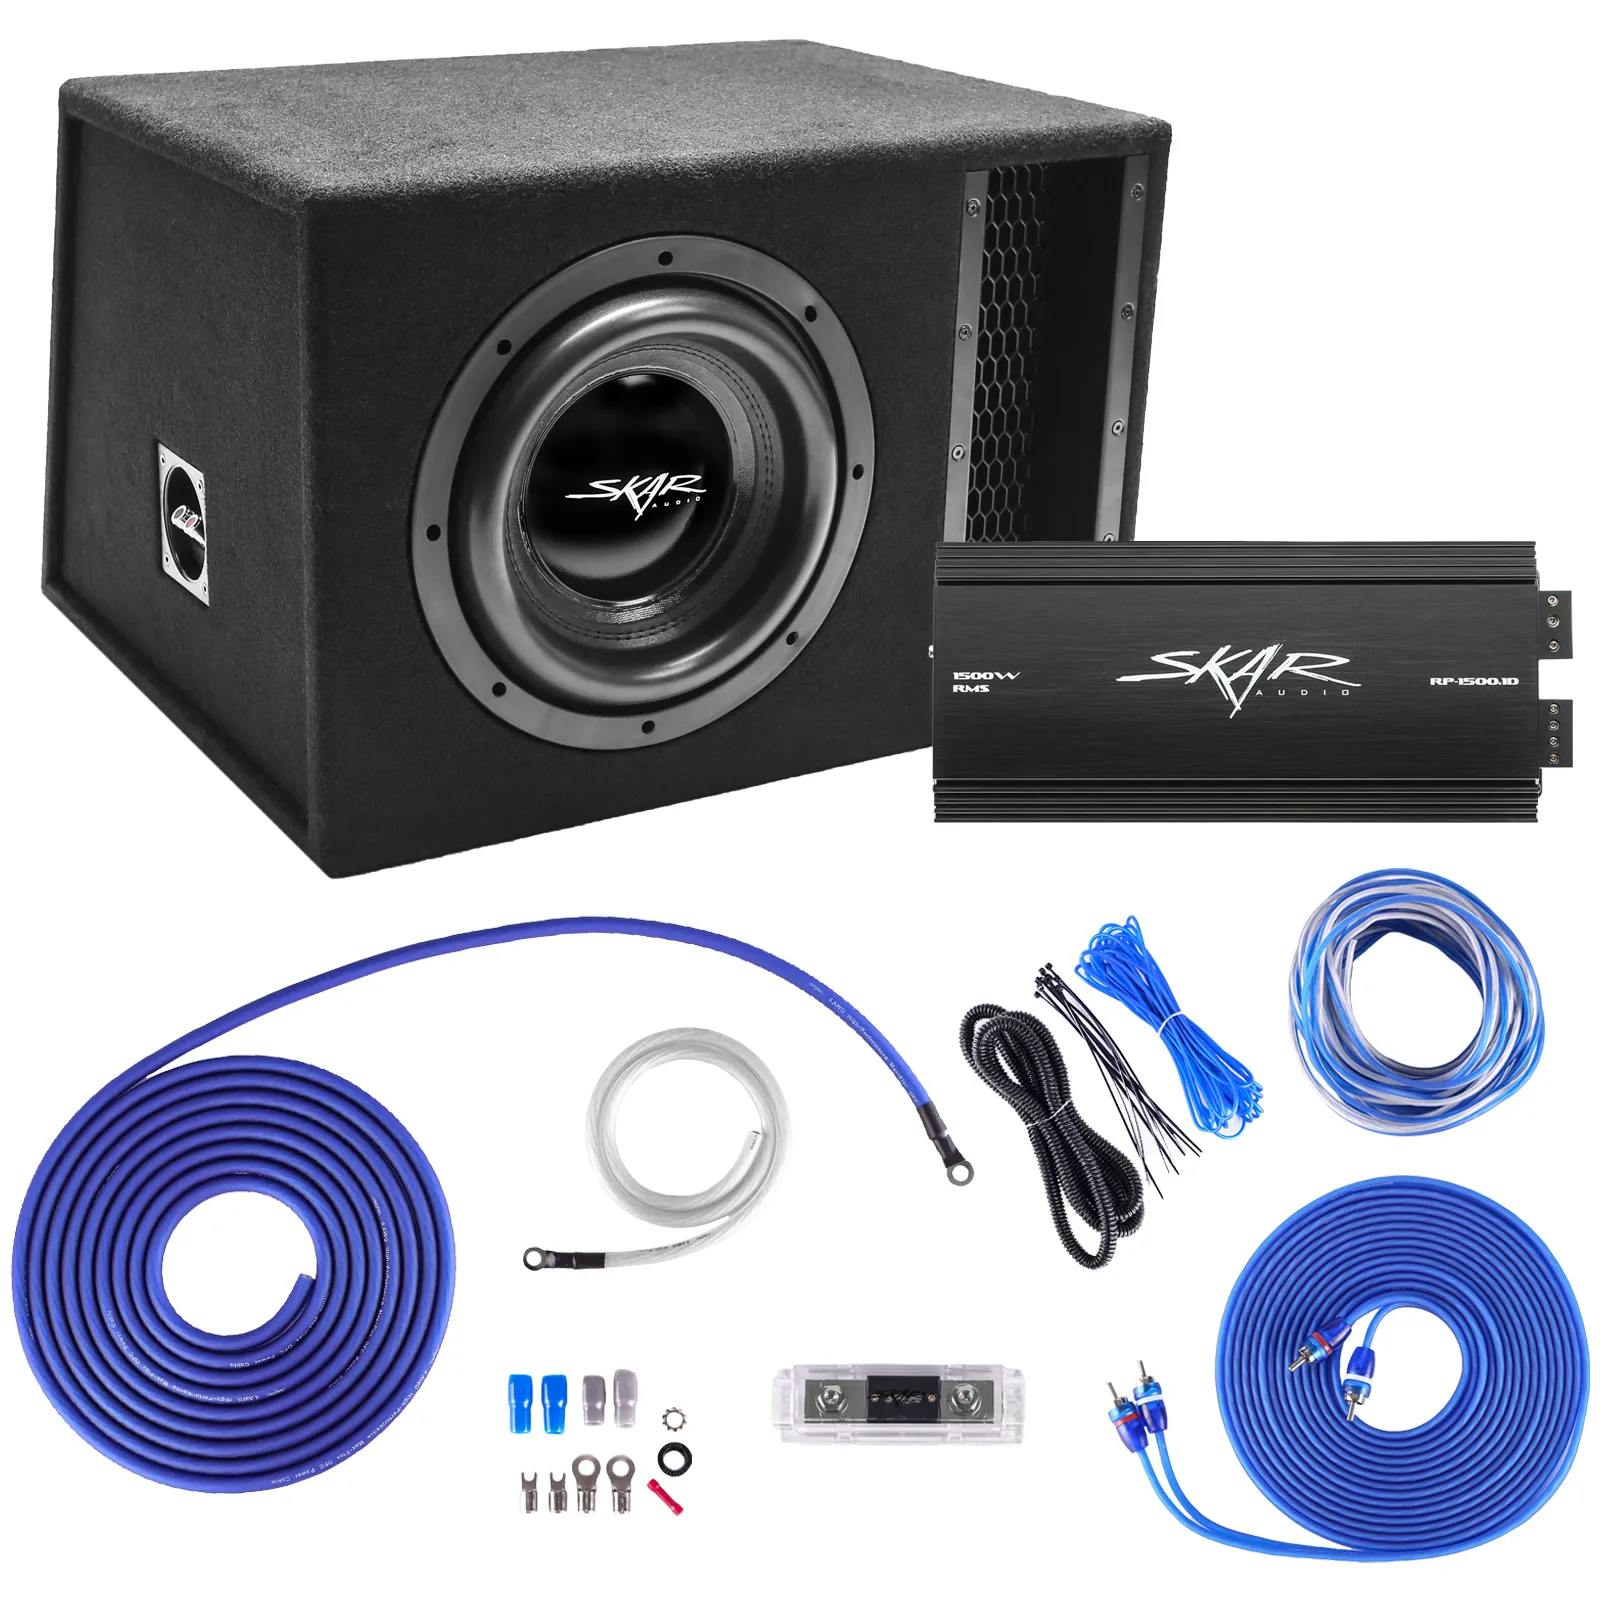 Featured Product Photo for Single 10" 2,000 Watt EVL Series Complete Subwoofer Package with Vented Enclosure and Amplifier